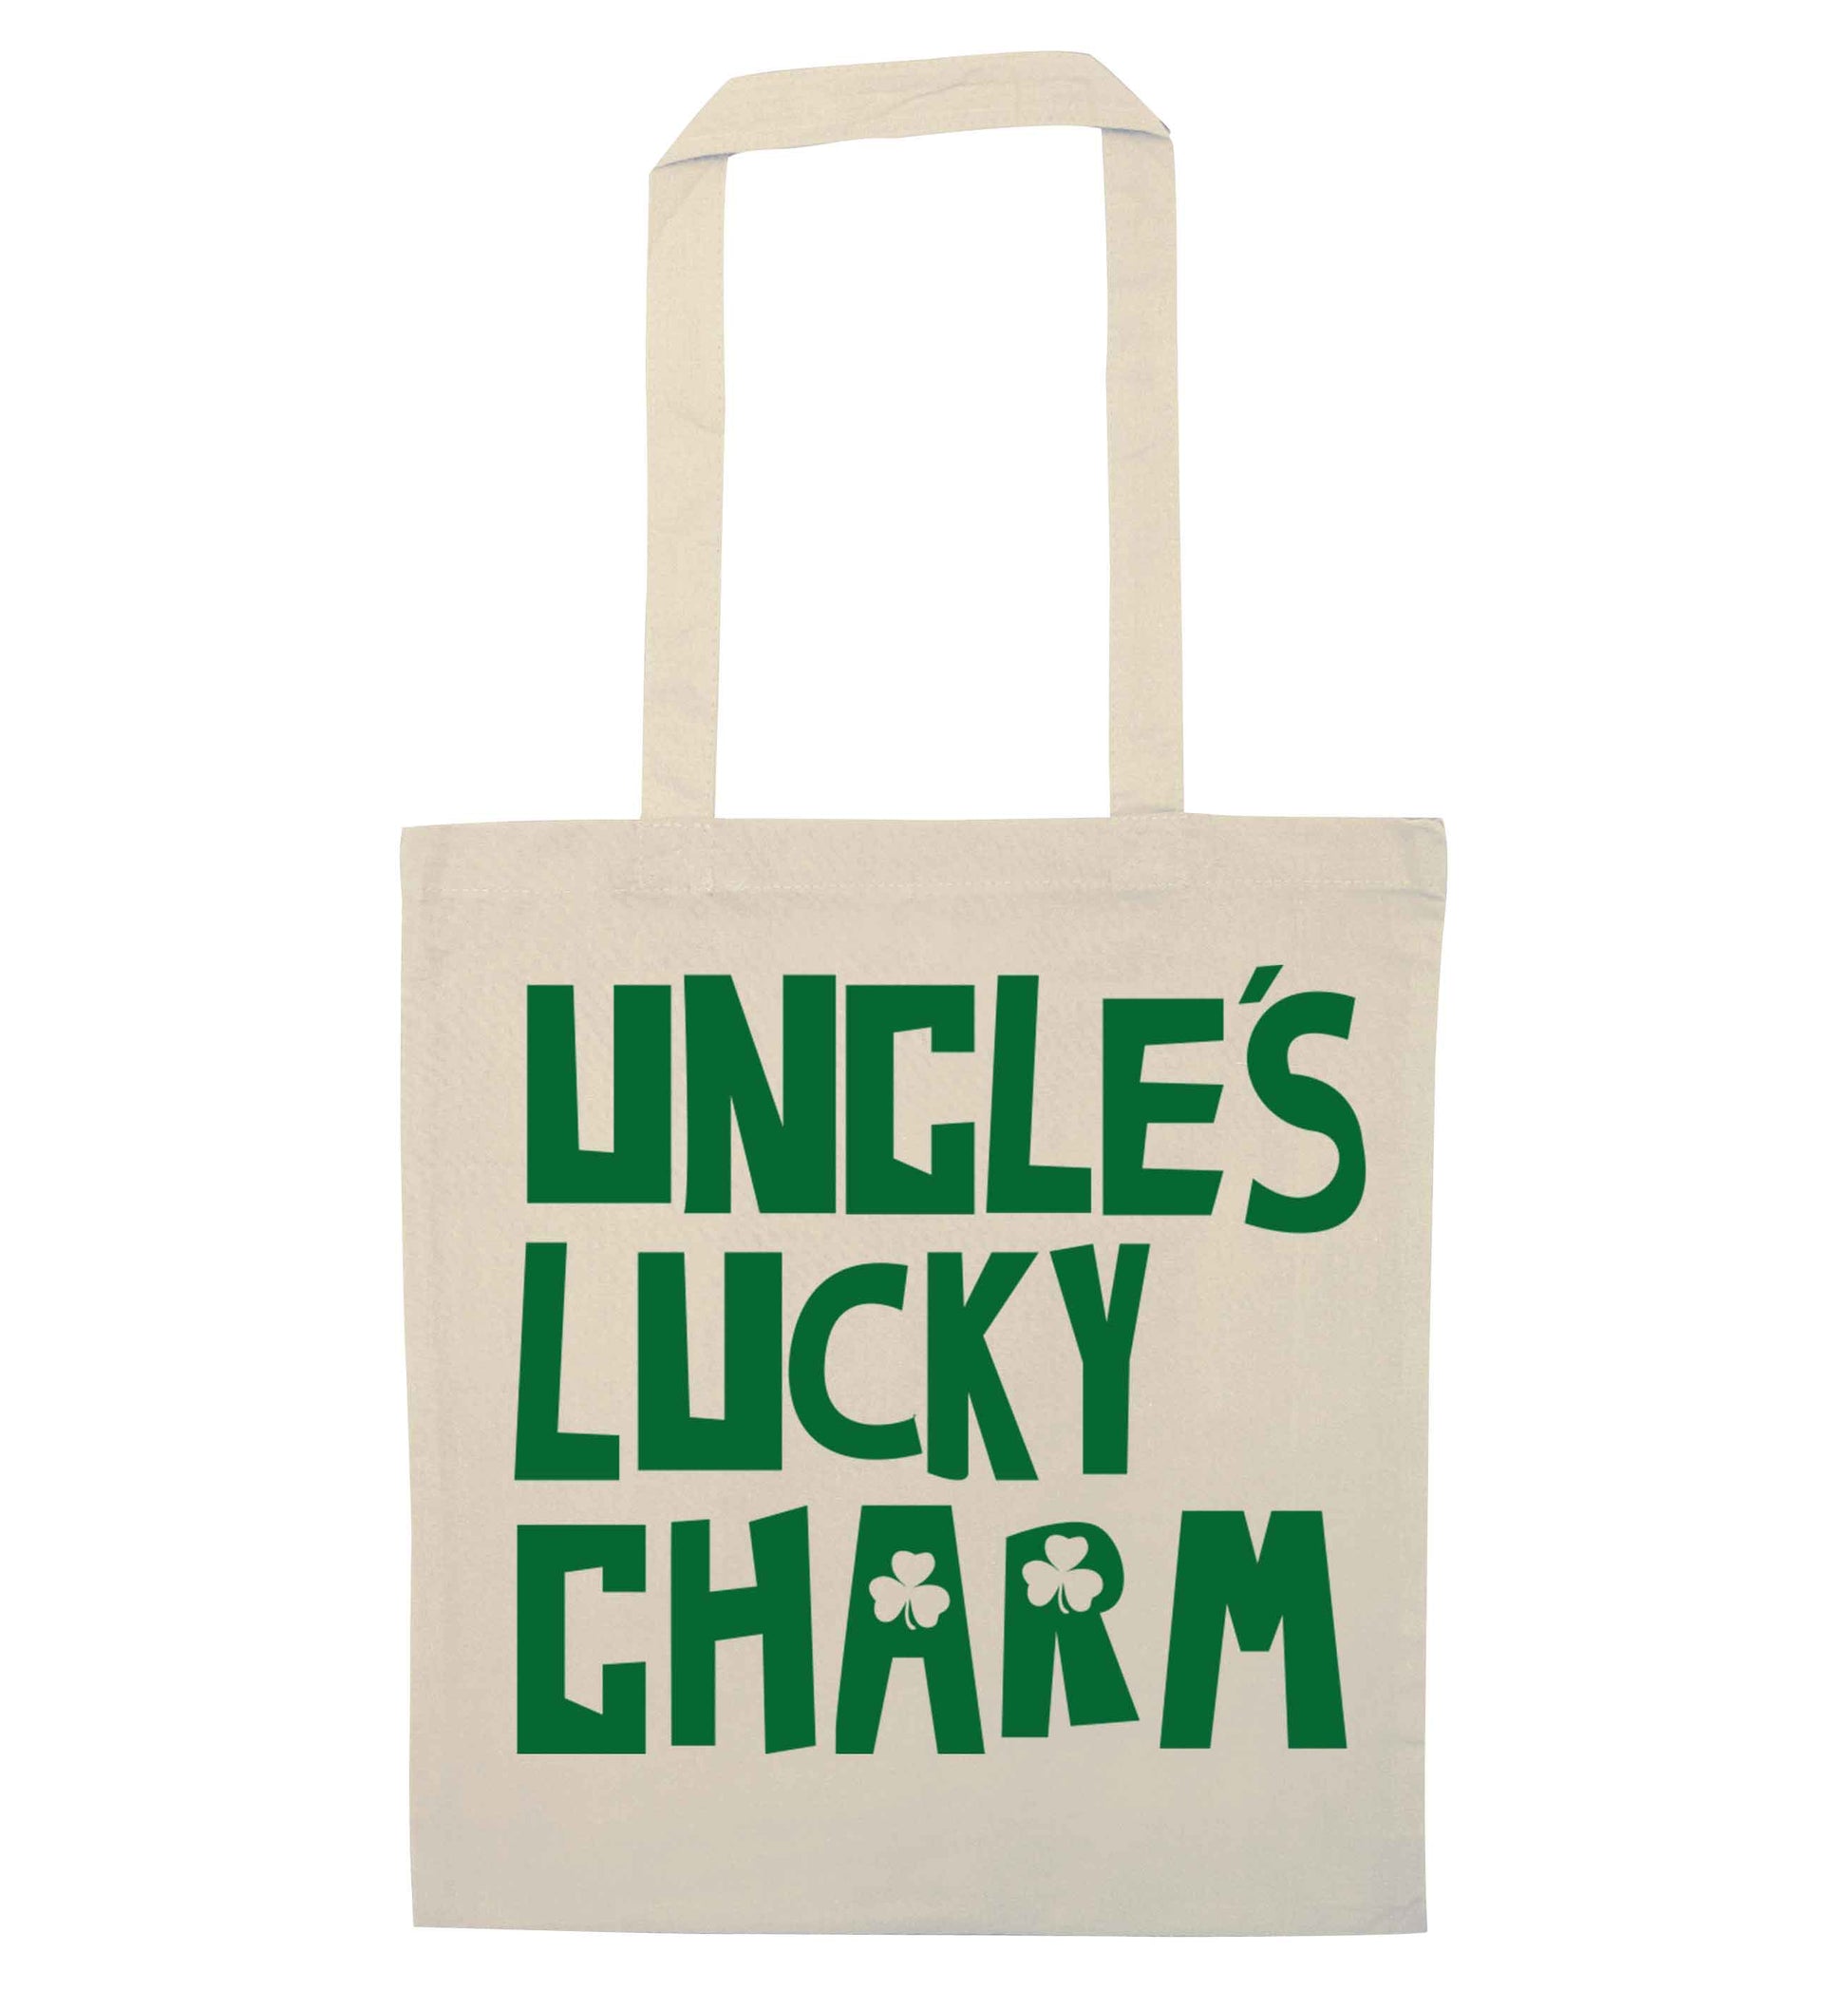 Uncles lucky charm natural tote bag